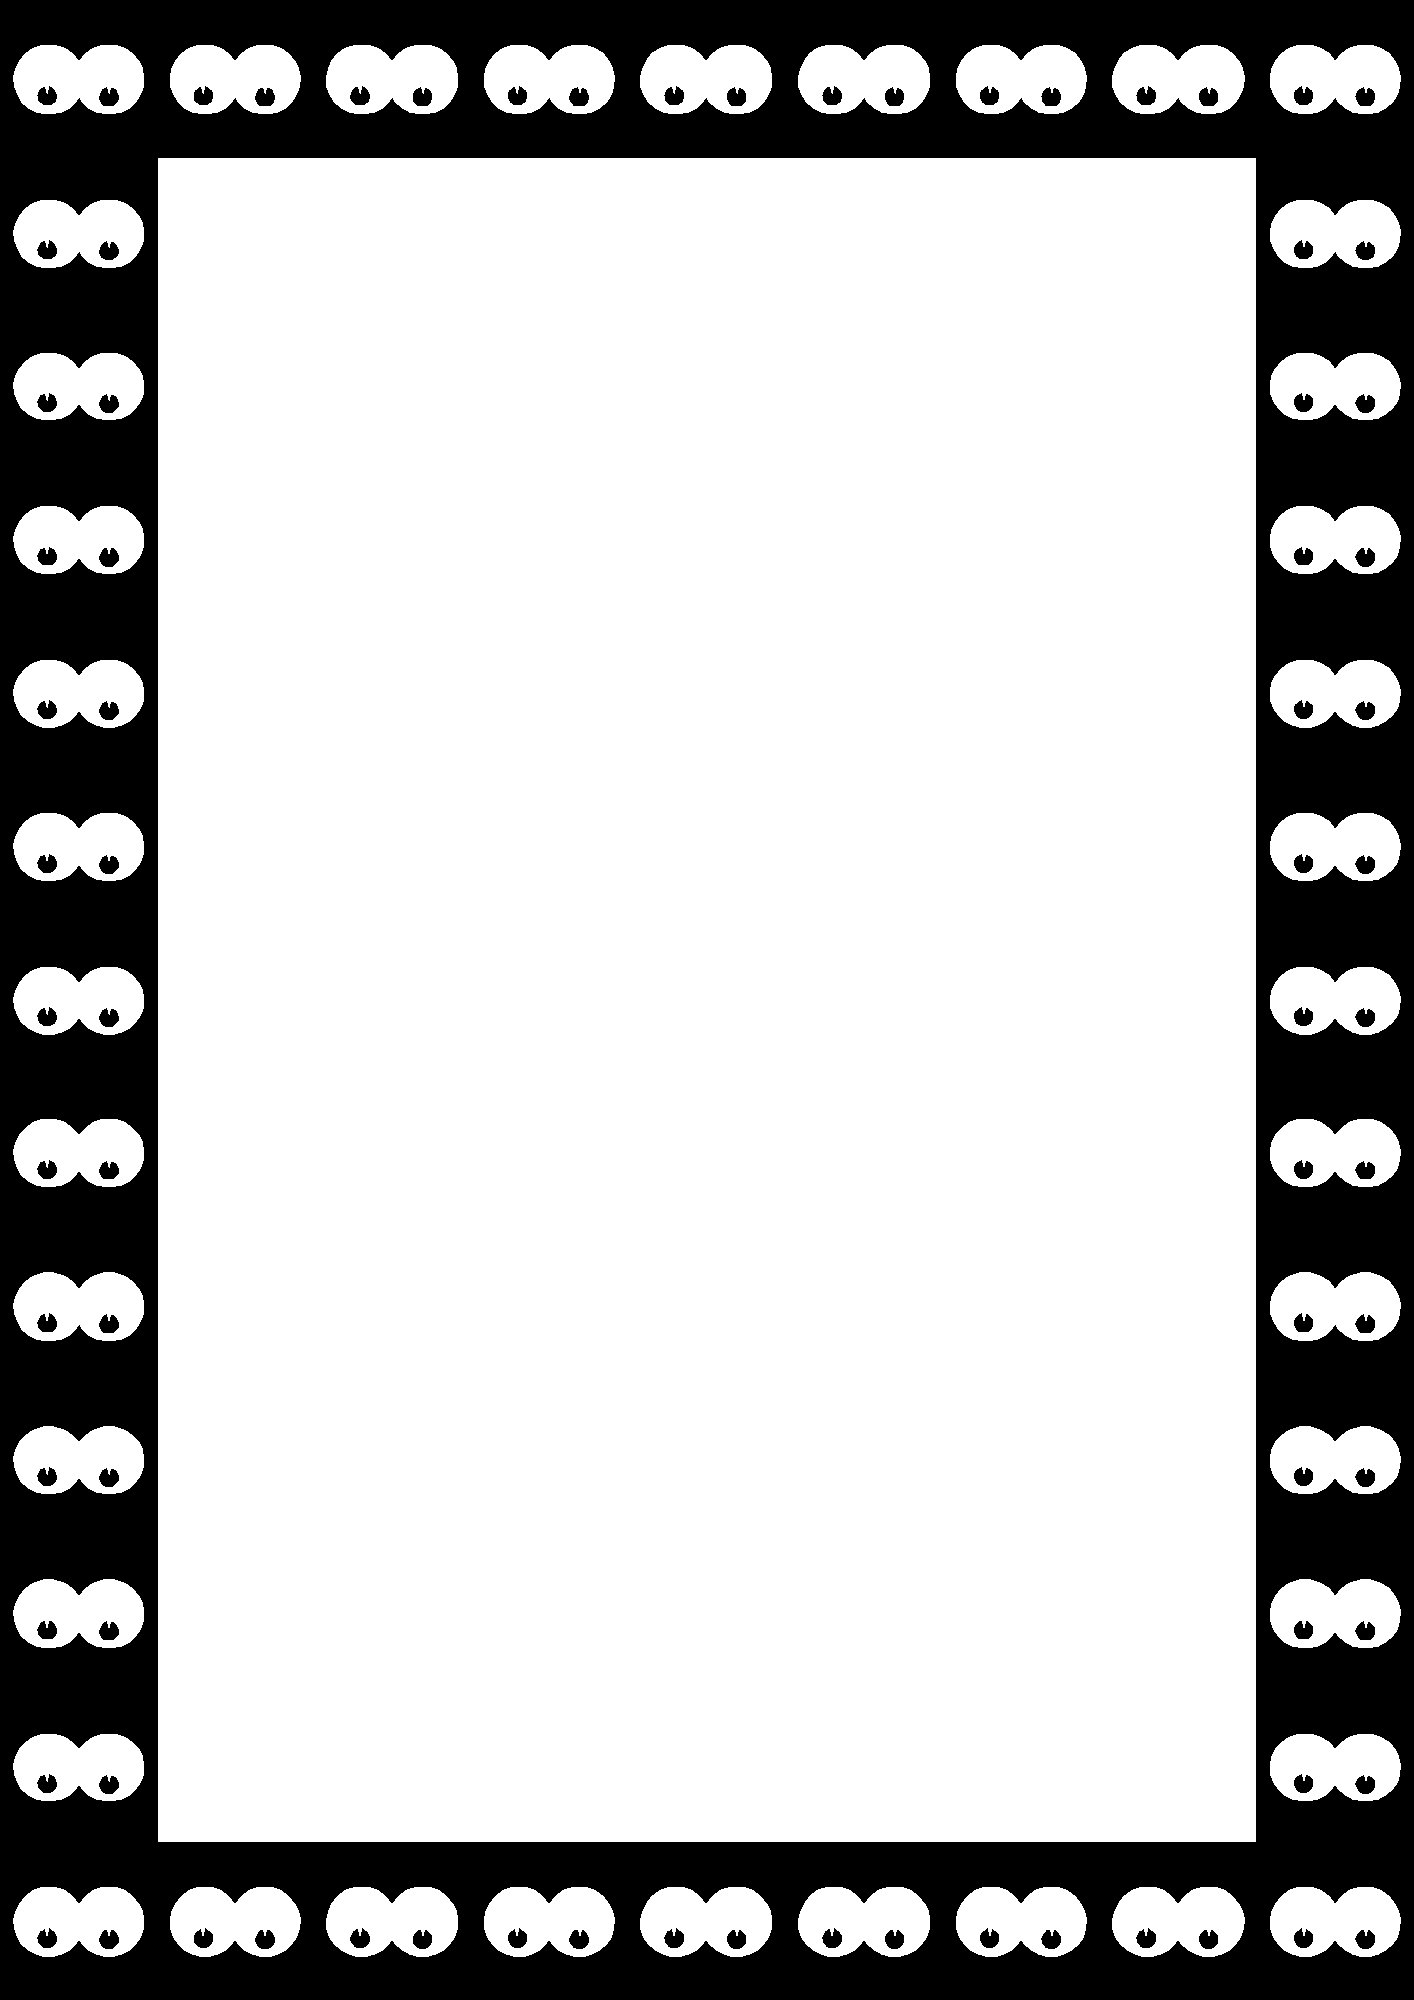 Free Pie Border Cliparts, Download Free Pie Border Cliparts png images